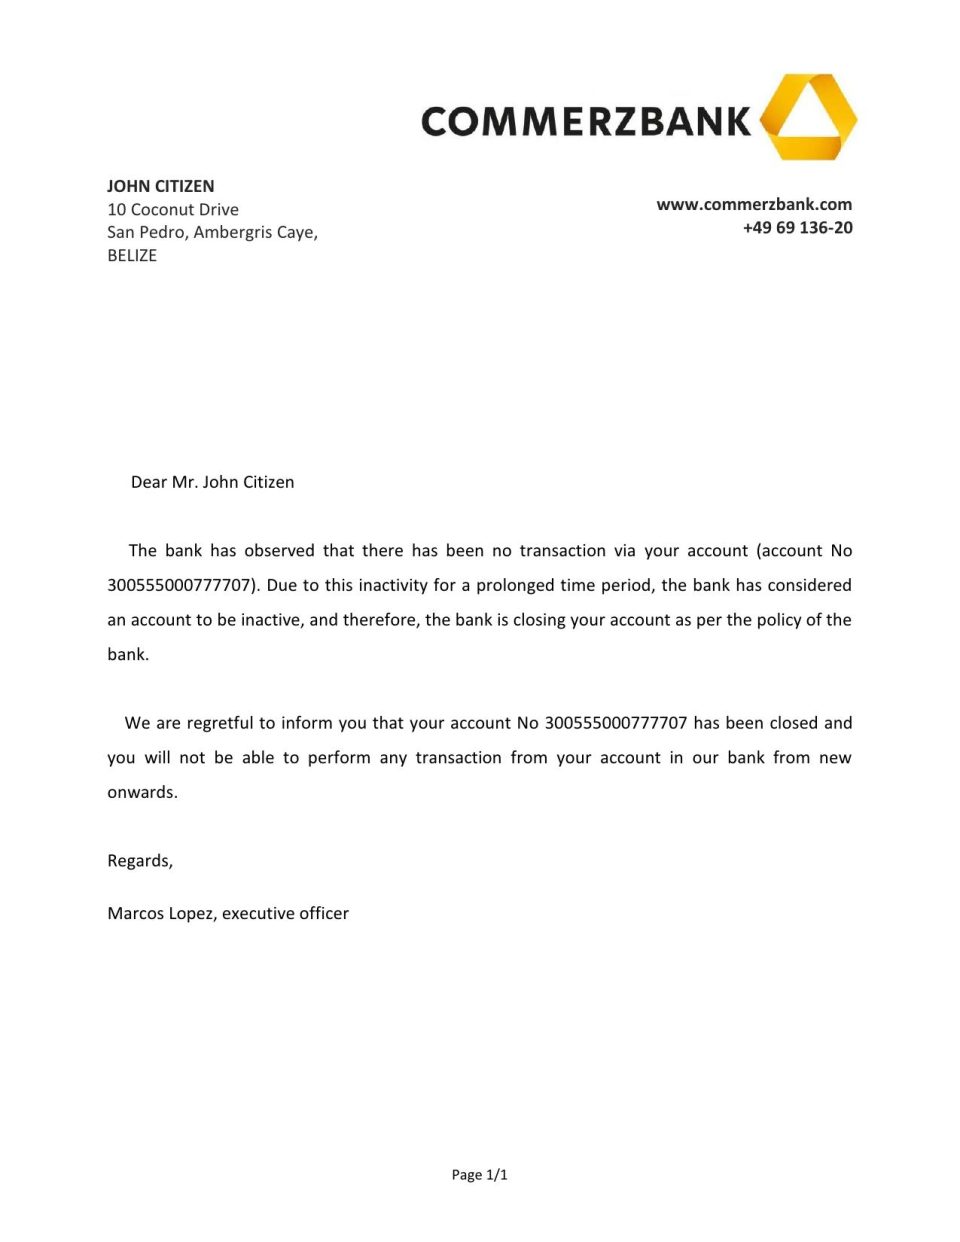 Download Belize Commerzbank Bank Reference Letter Templates | Editable Word